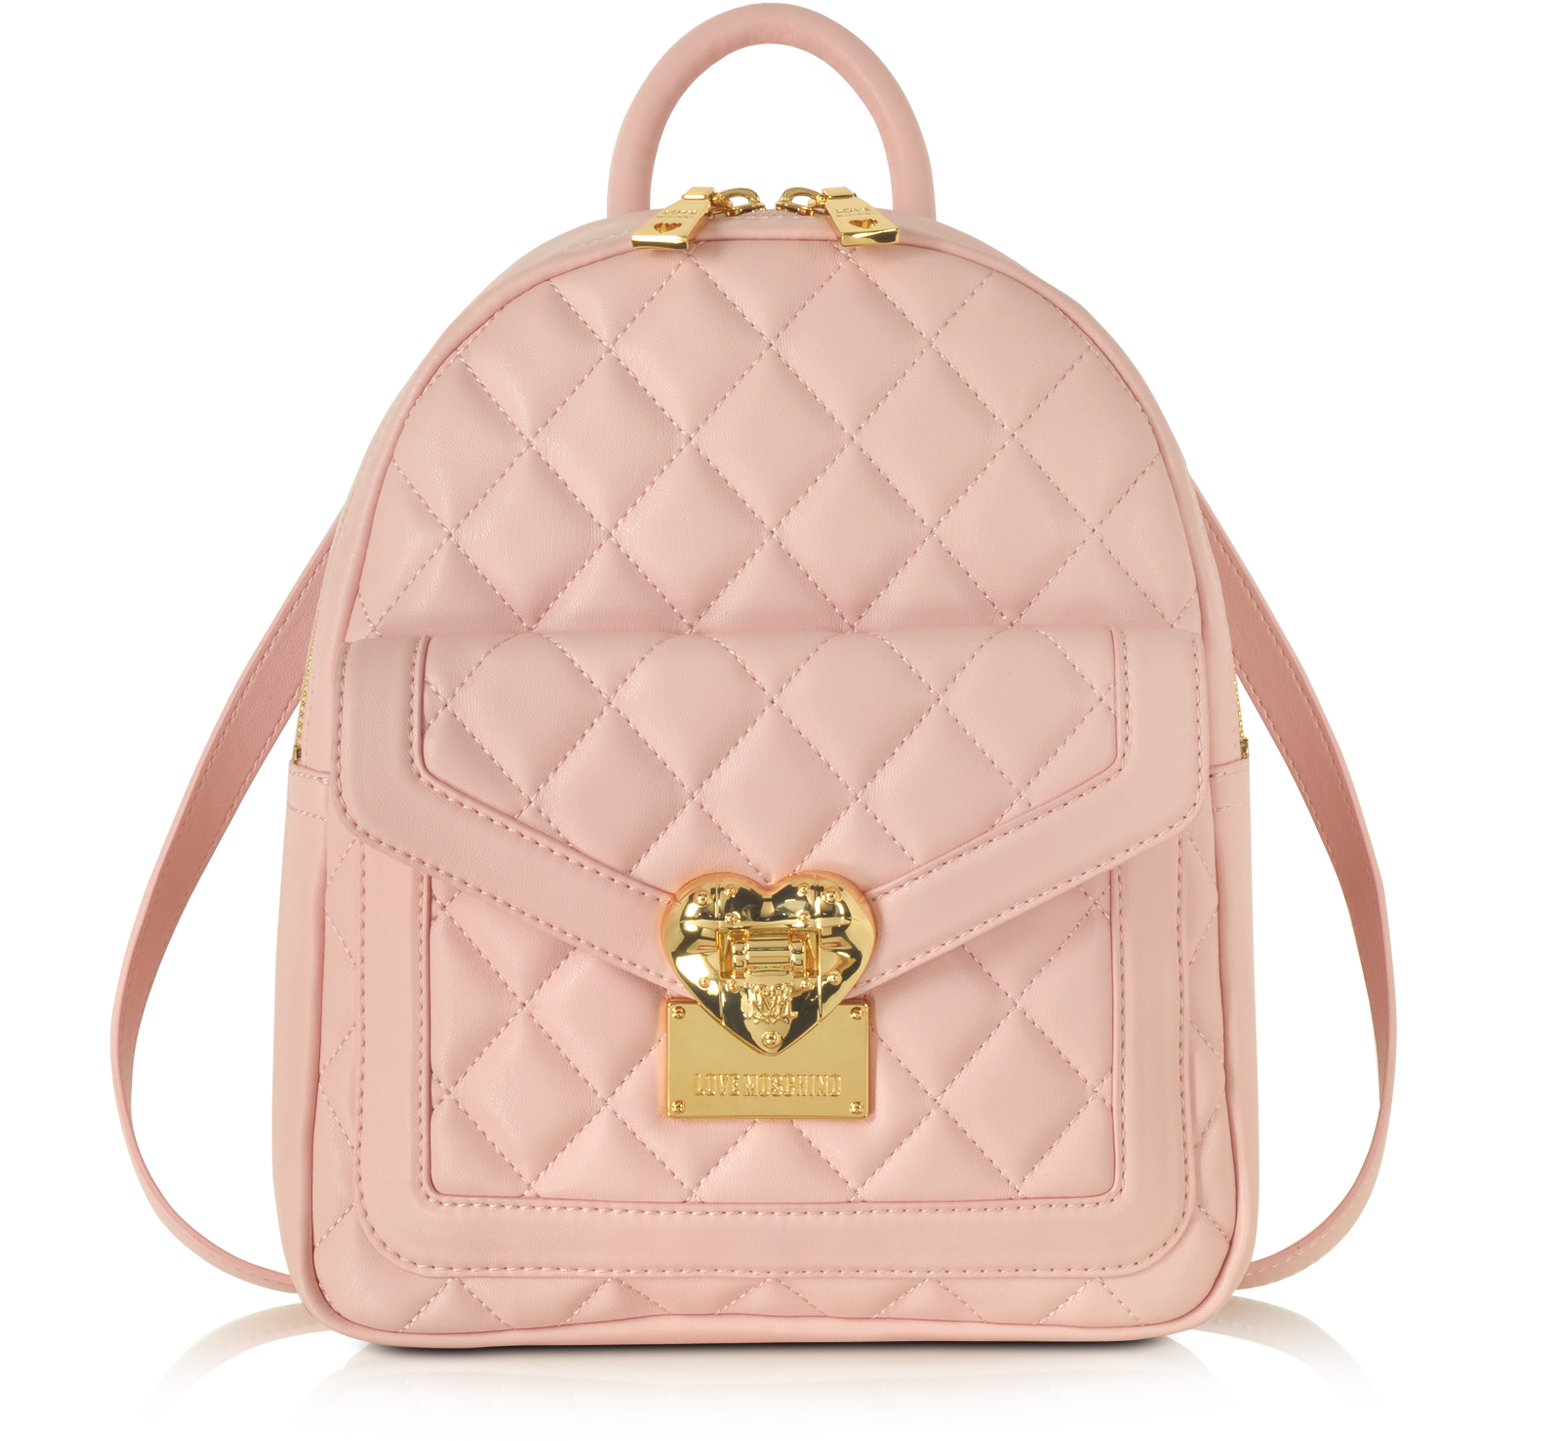 love moschino backpack pink